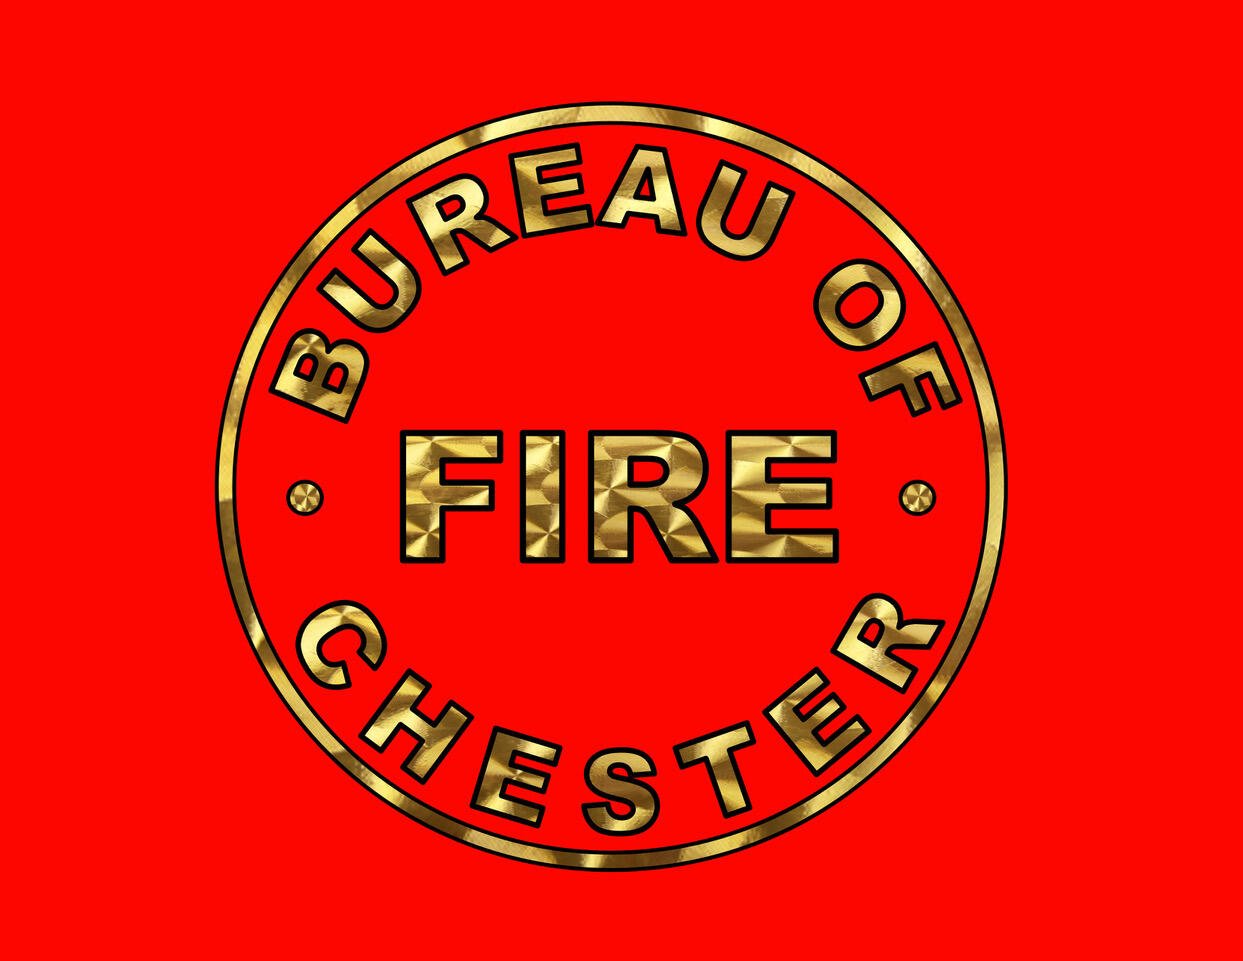 Official page of the City of Chester Bureau of Fire